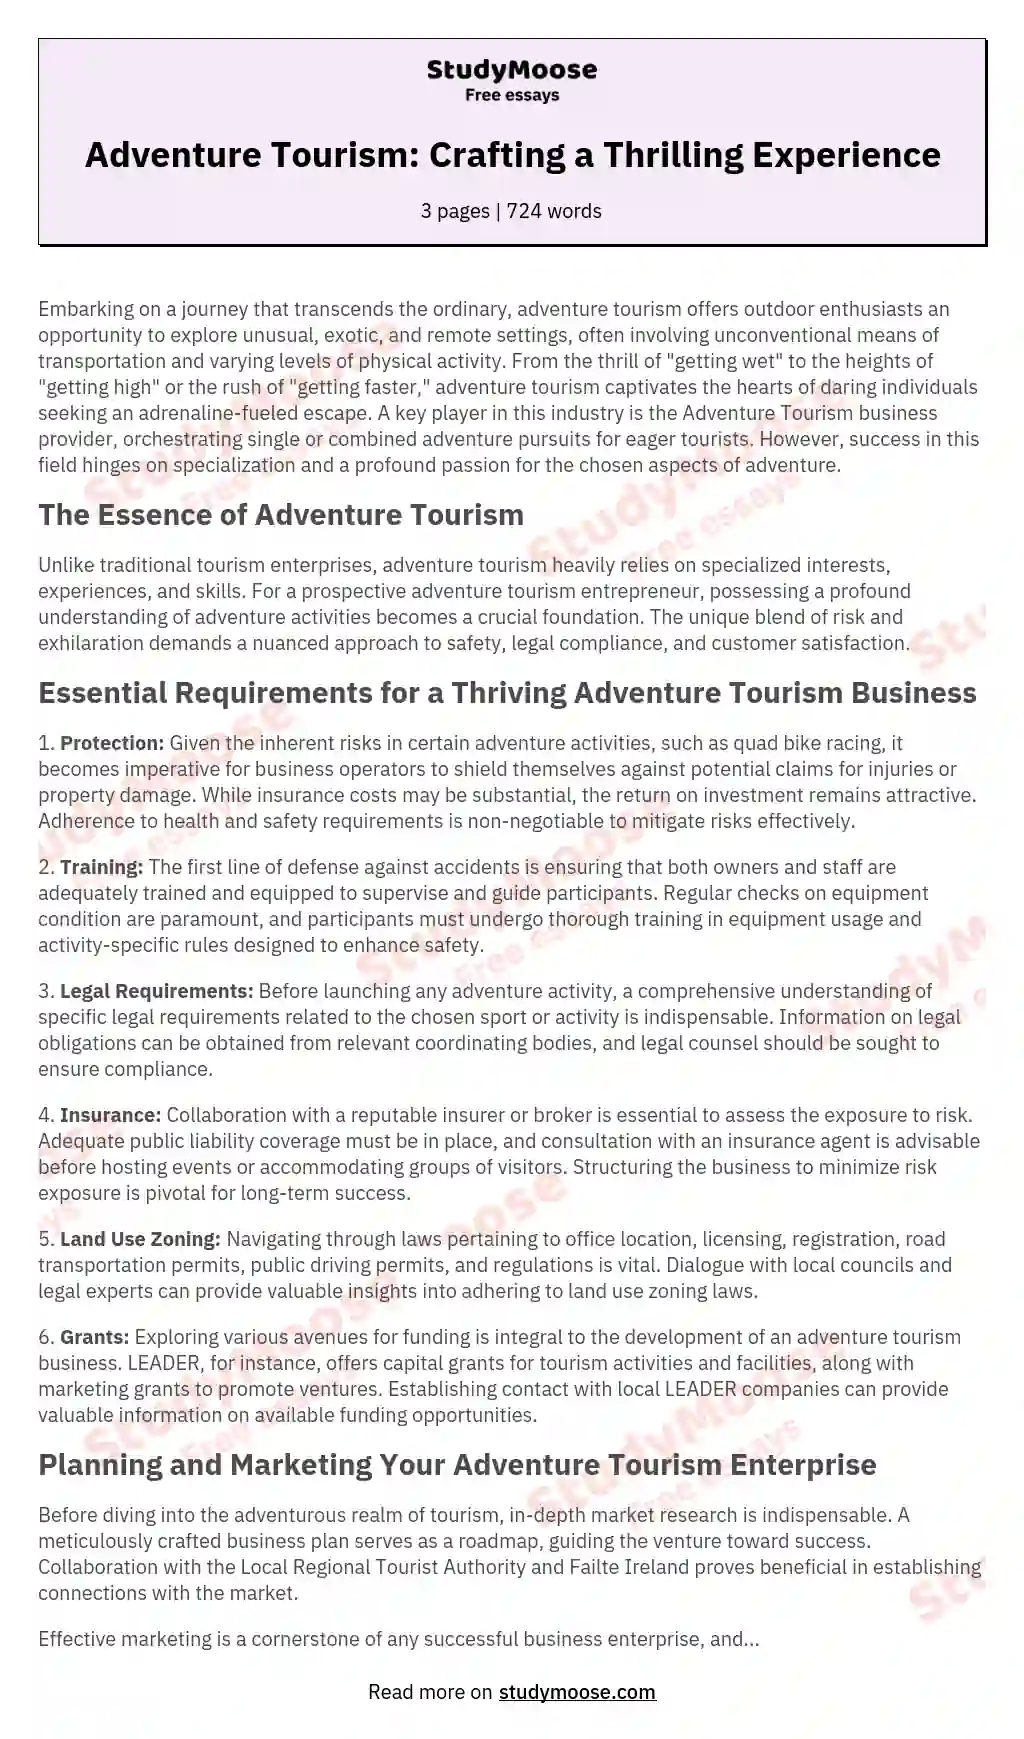 Adventure Tourism: Crafting a Thrilling Experience essay